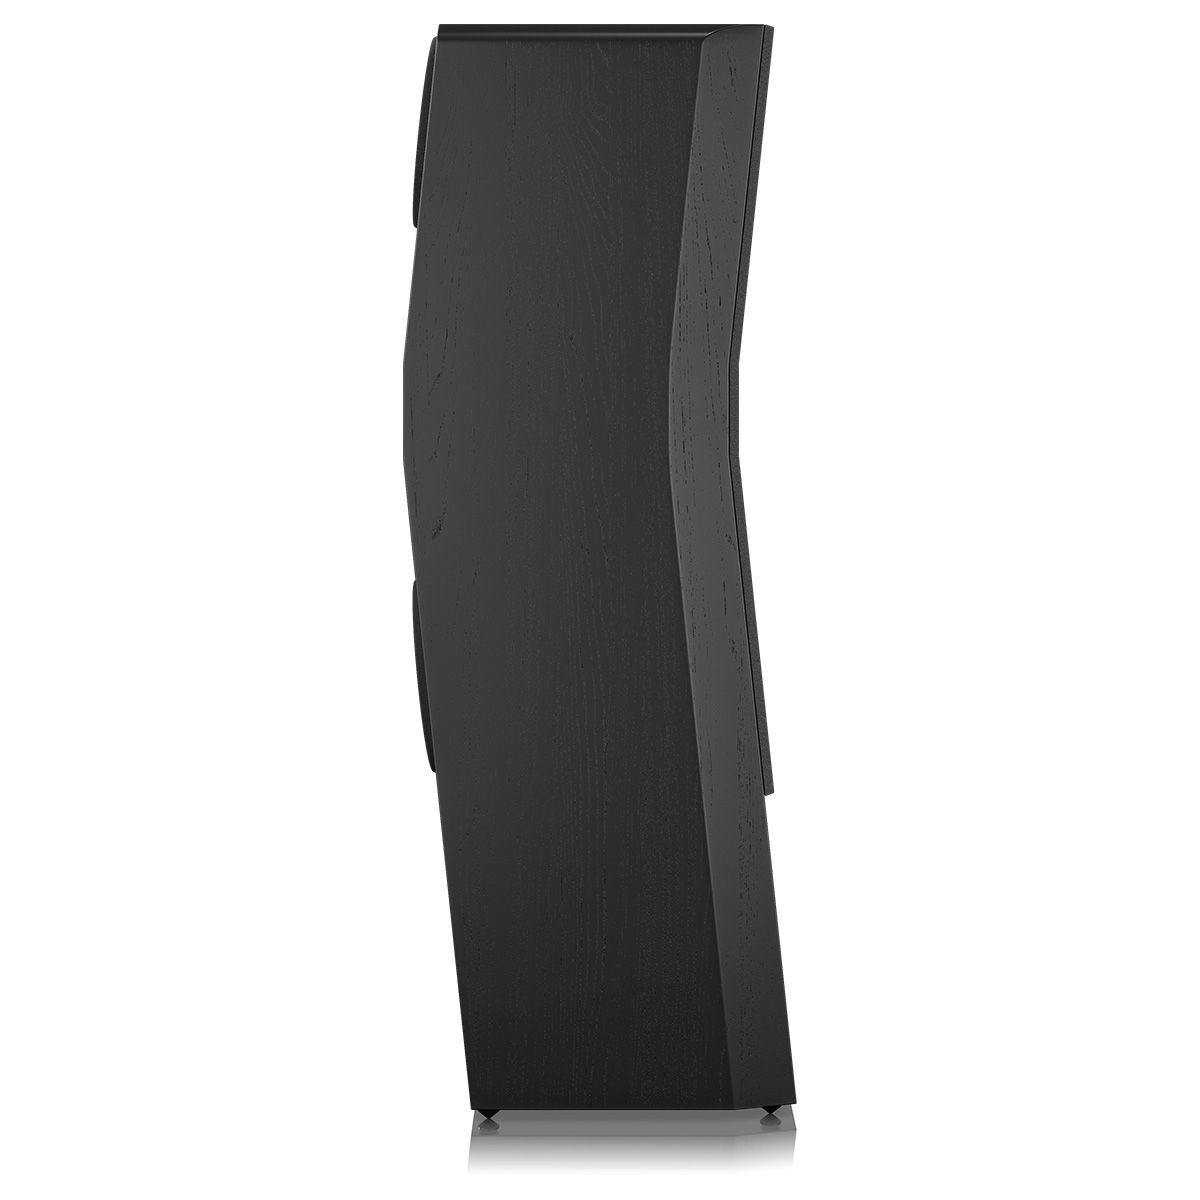 SVS Ultra Evolution Pinnacle Floorstanding Loudspeaker - single black oak with grille - angled rear view without components